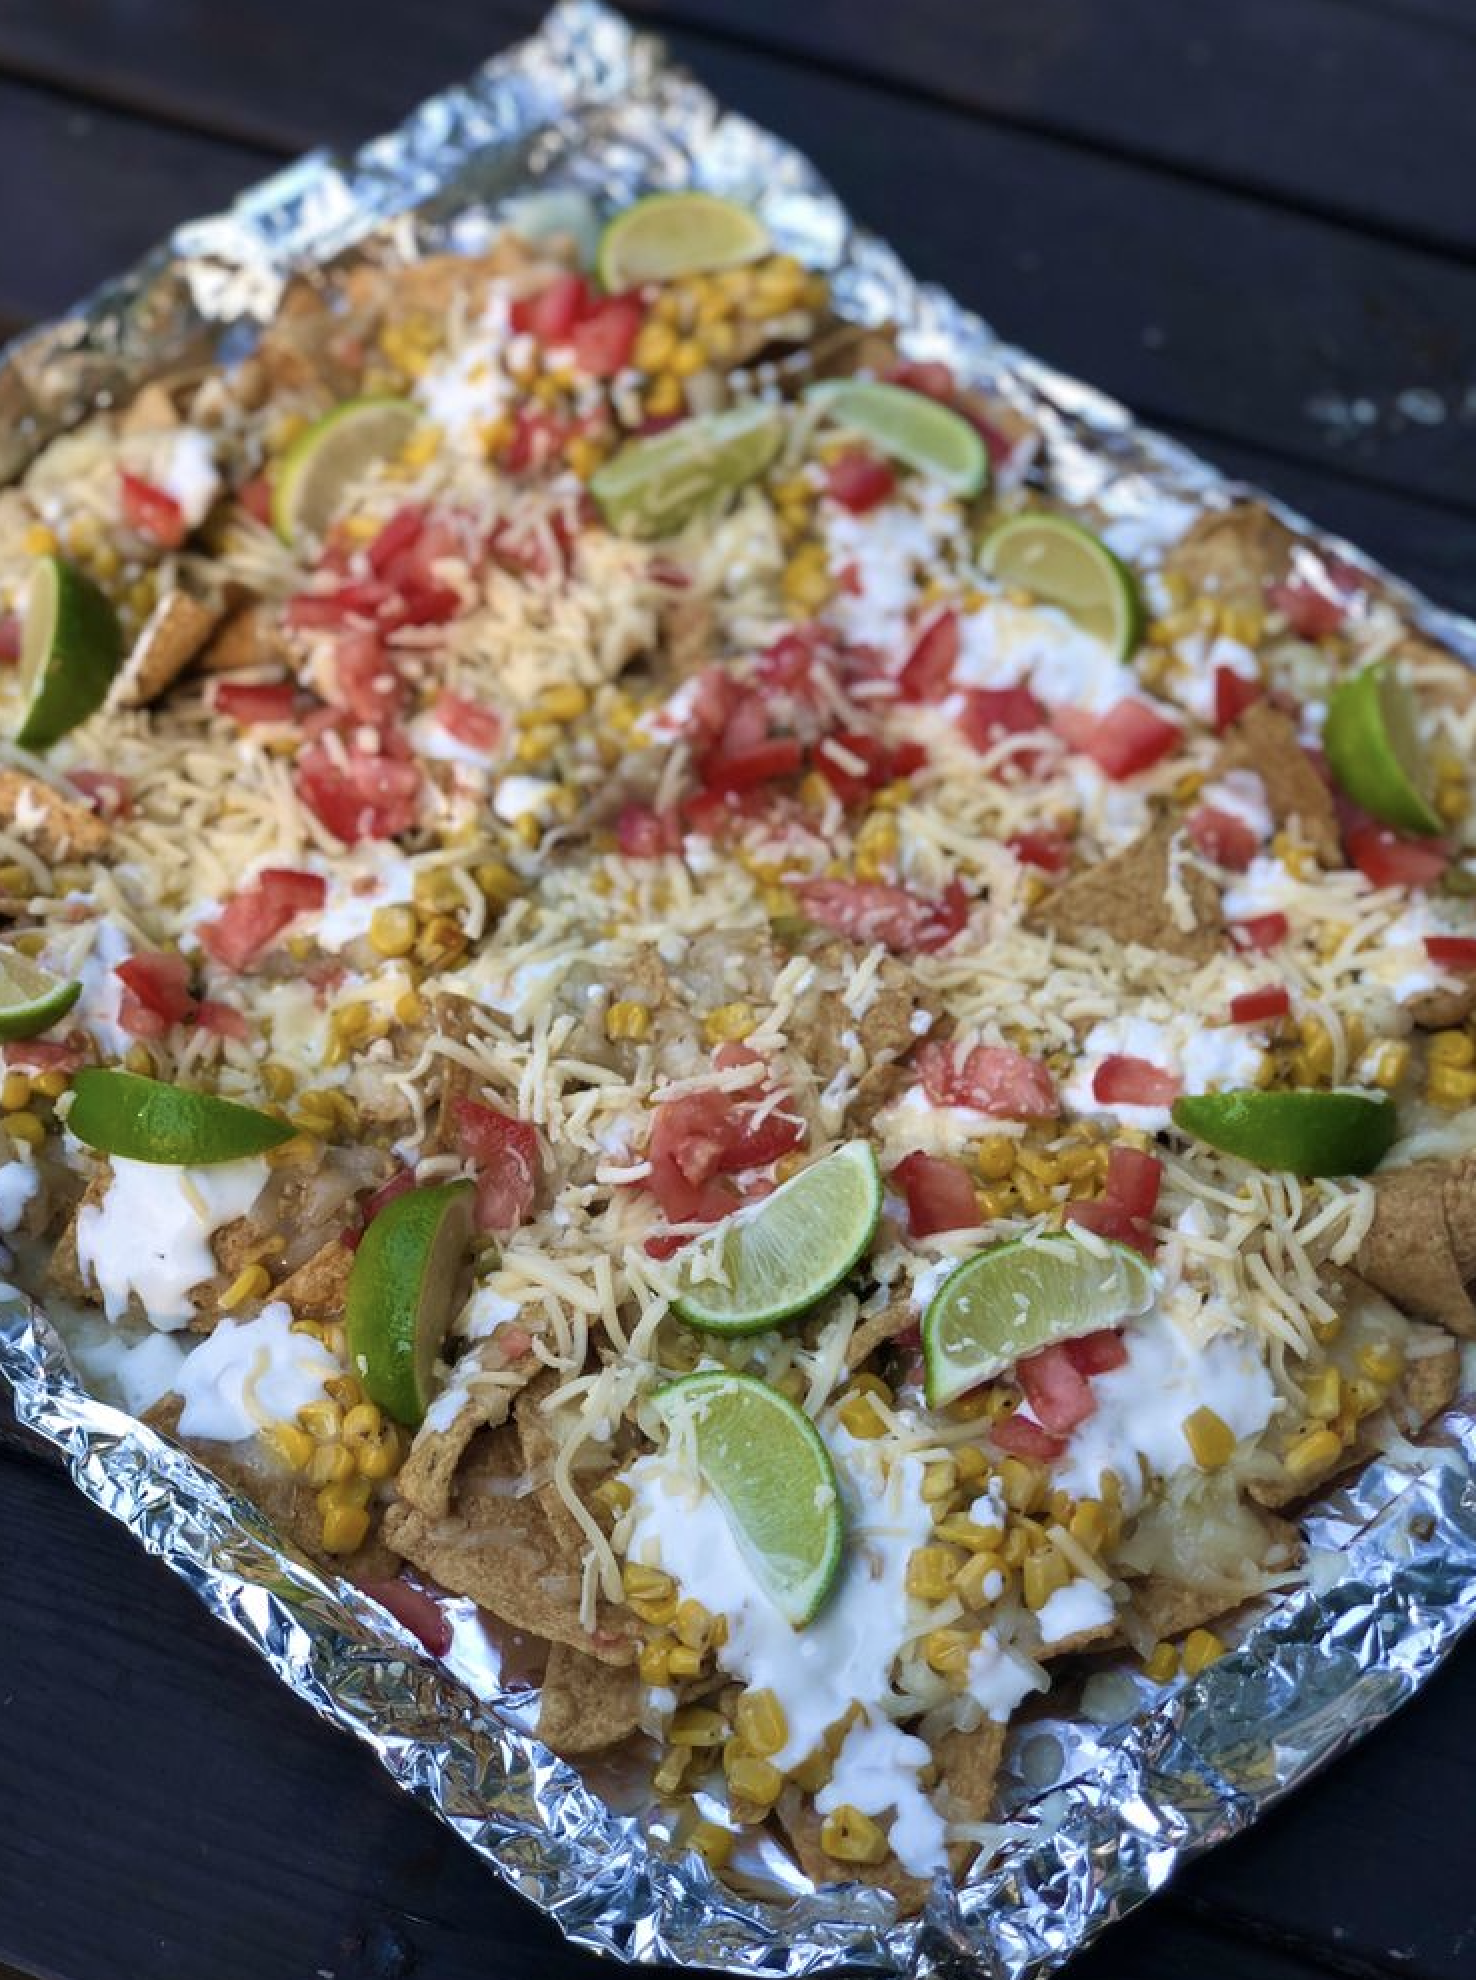 Everyone’s favorite Mexican elote is made into the BEST nachos! Loaded with roasted corn, lime, chili powder and Mexican crema!